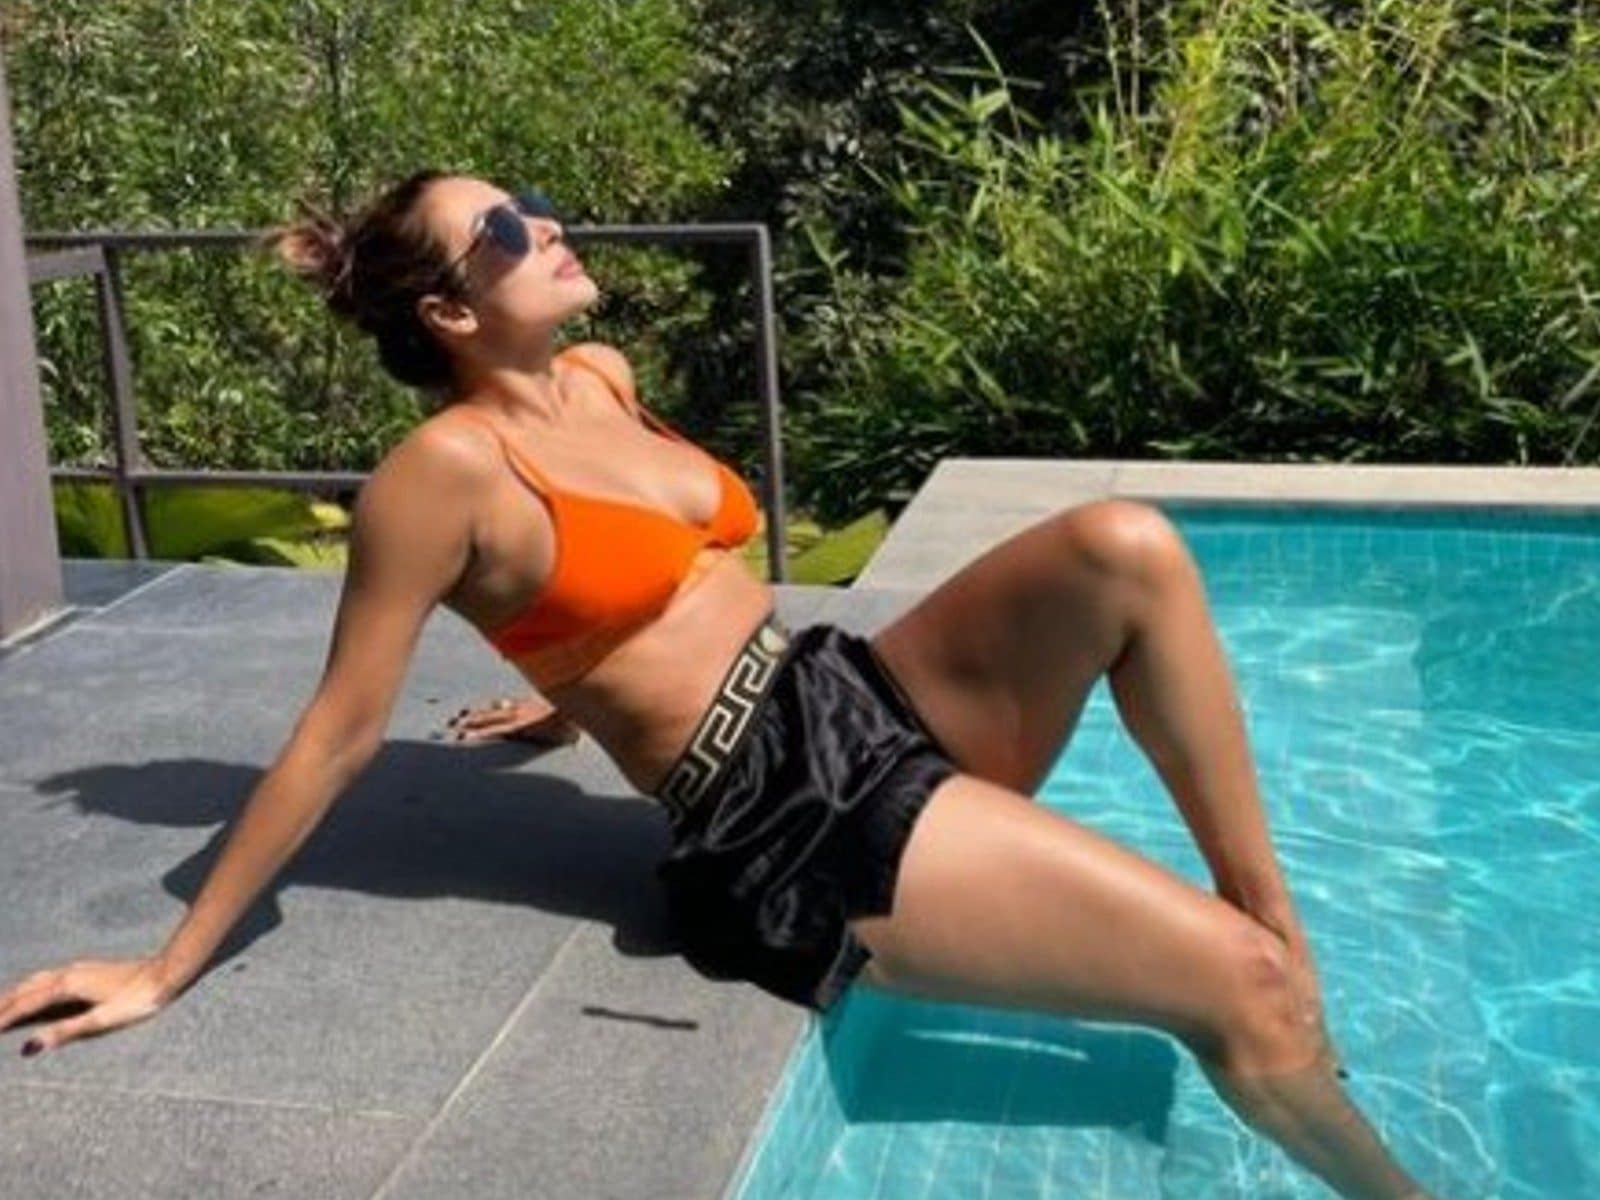 Malaika Arora is unbelievably sexy in sports bra and shorts. See